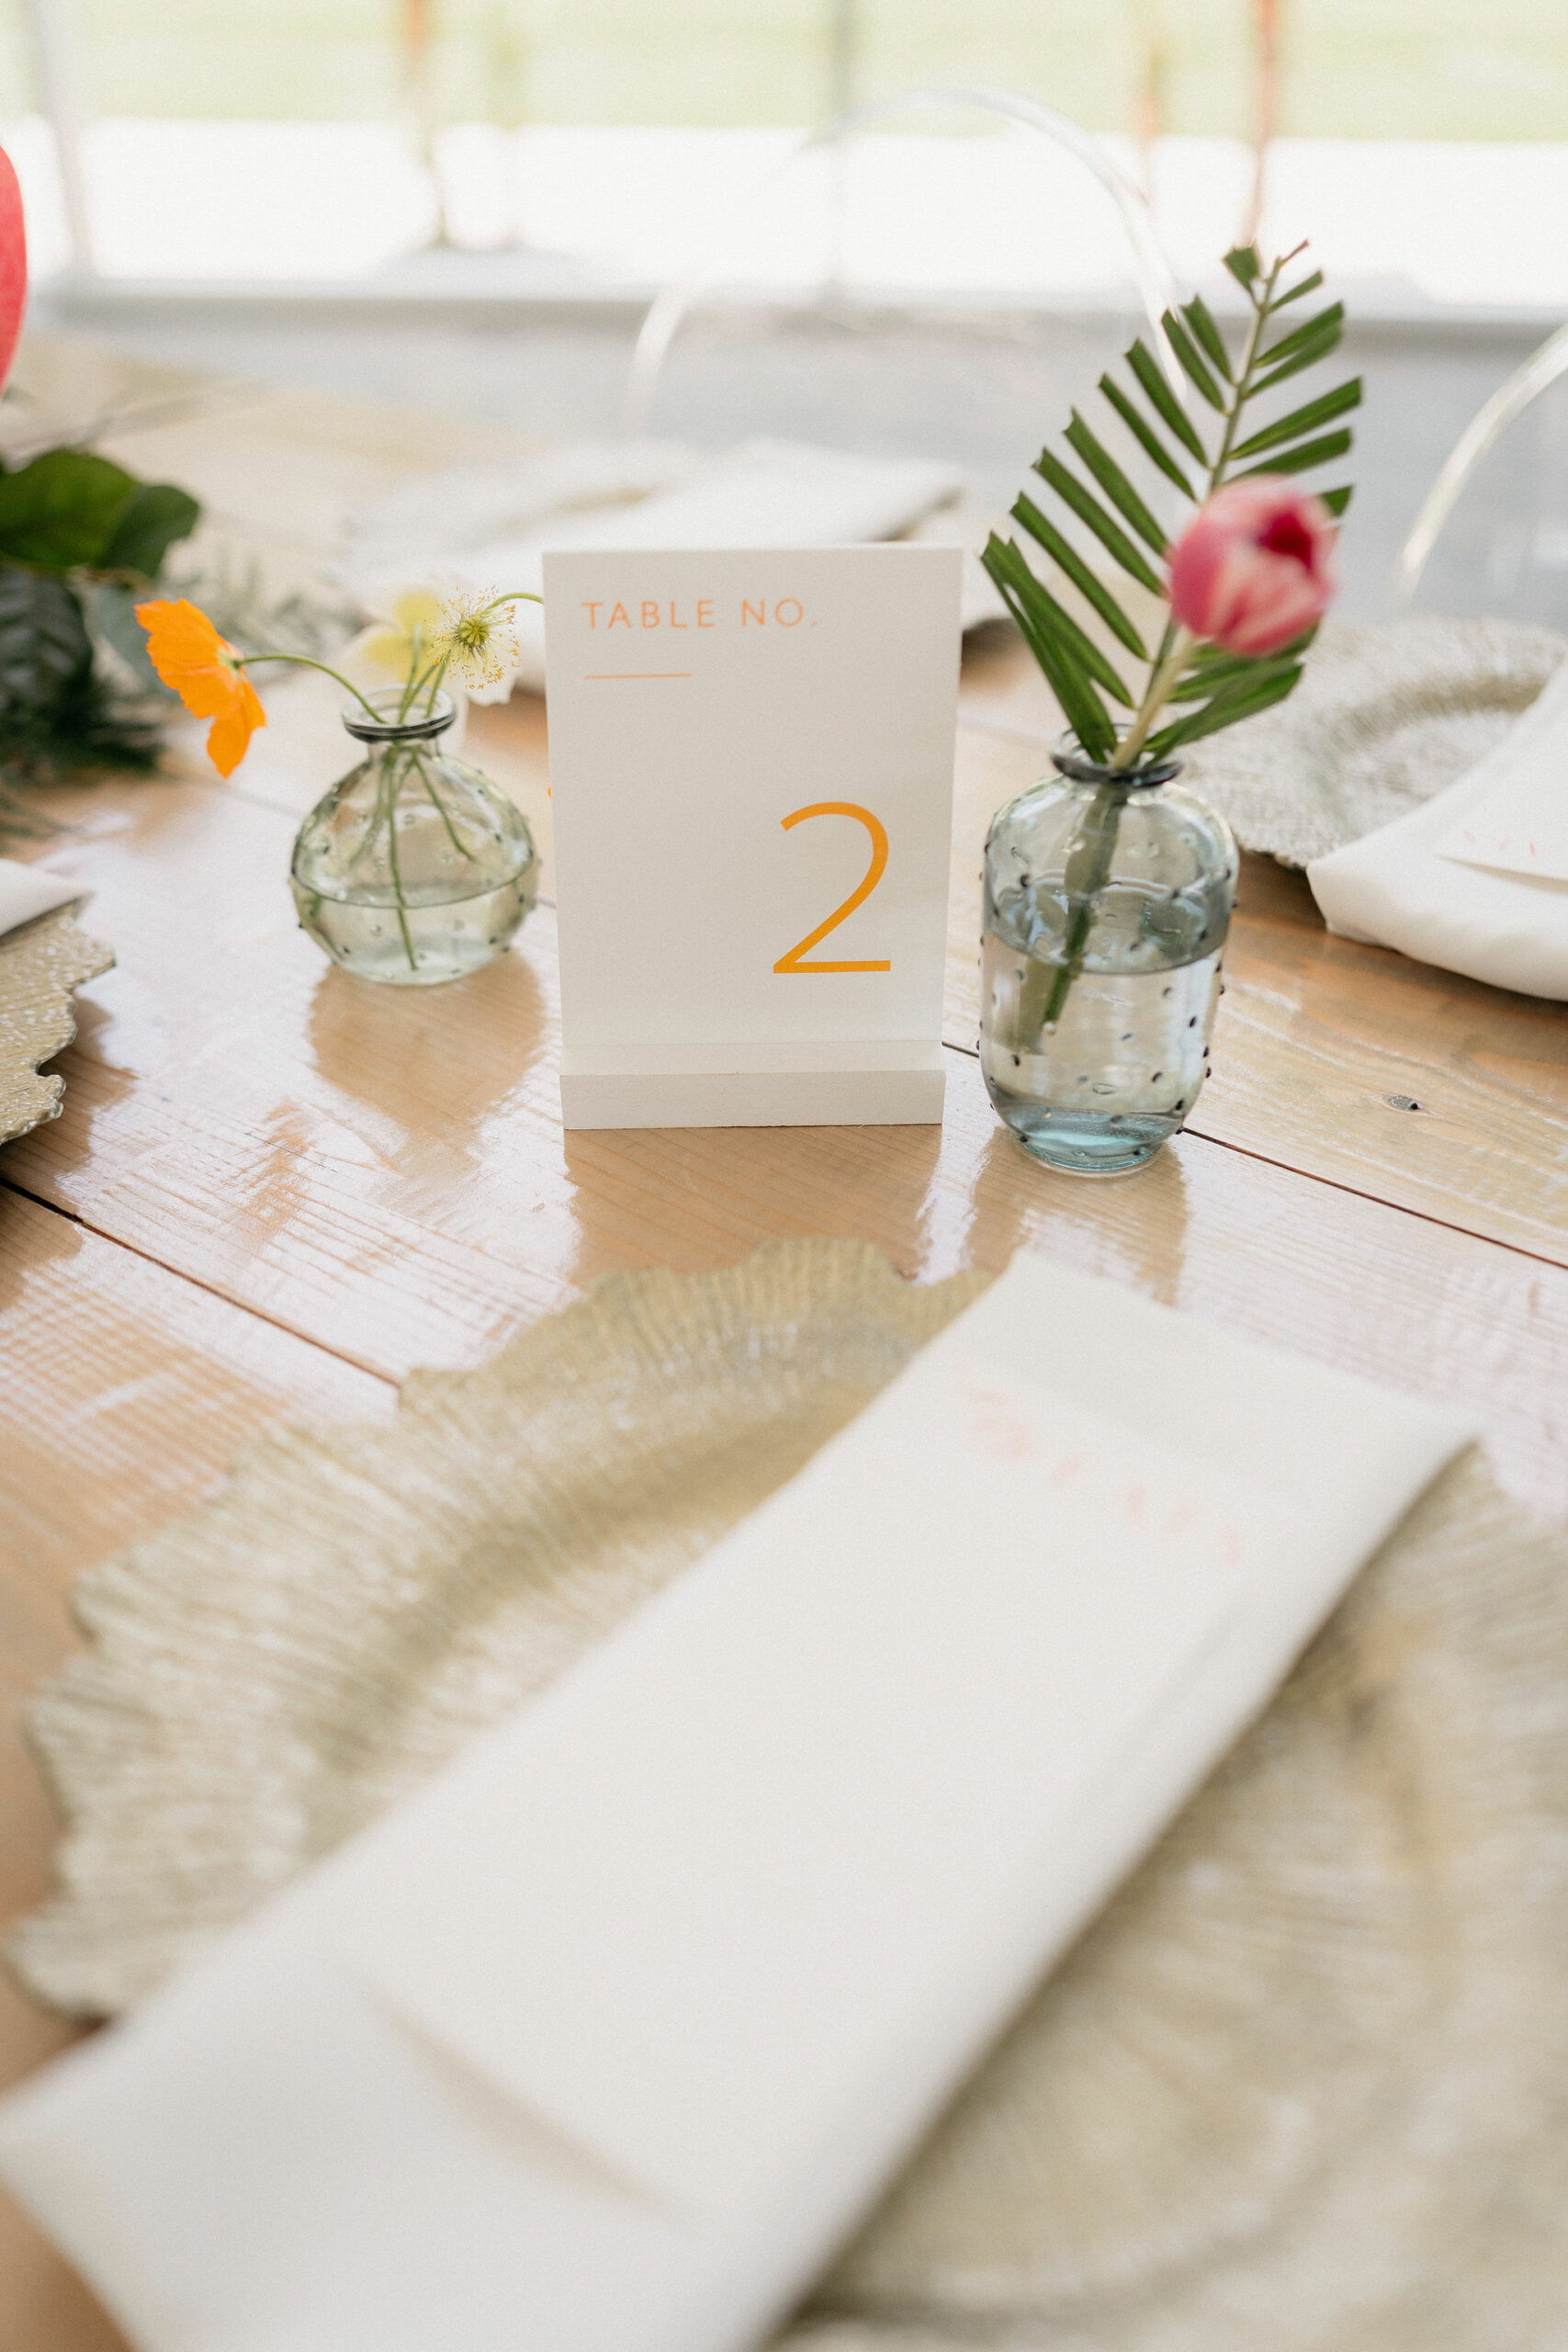 Table number with bud vases